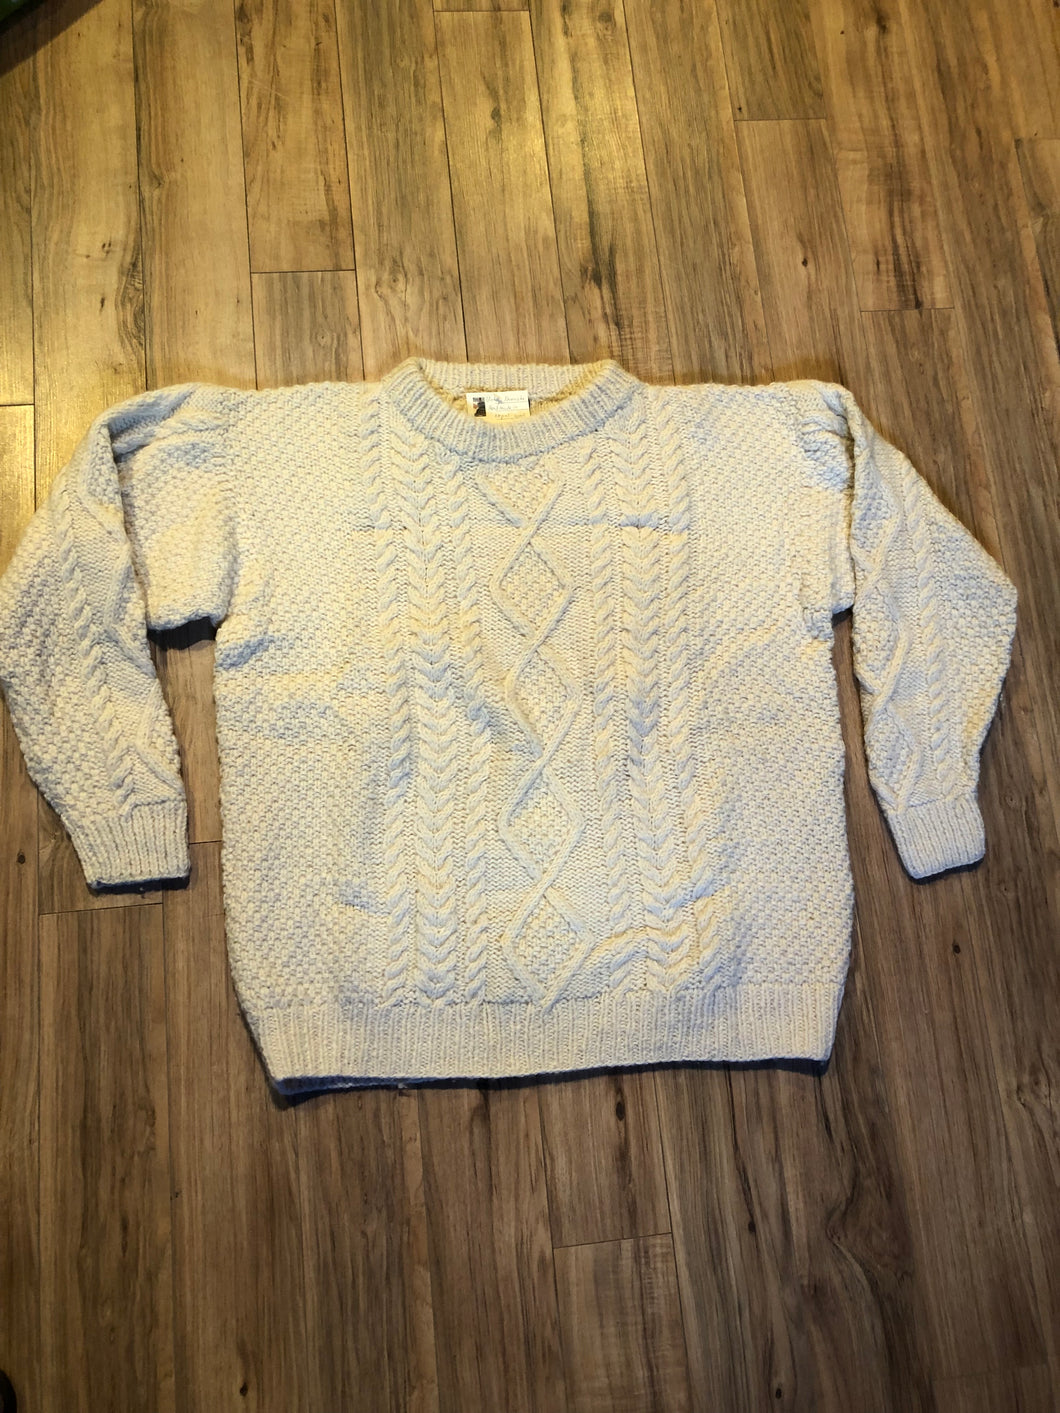 Kingspier Vintage - Vintage Namaste hand crafted 100% wool crew neck sweater

Made in Nepal.
Size XL.